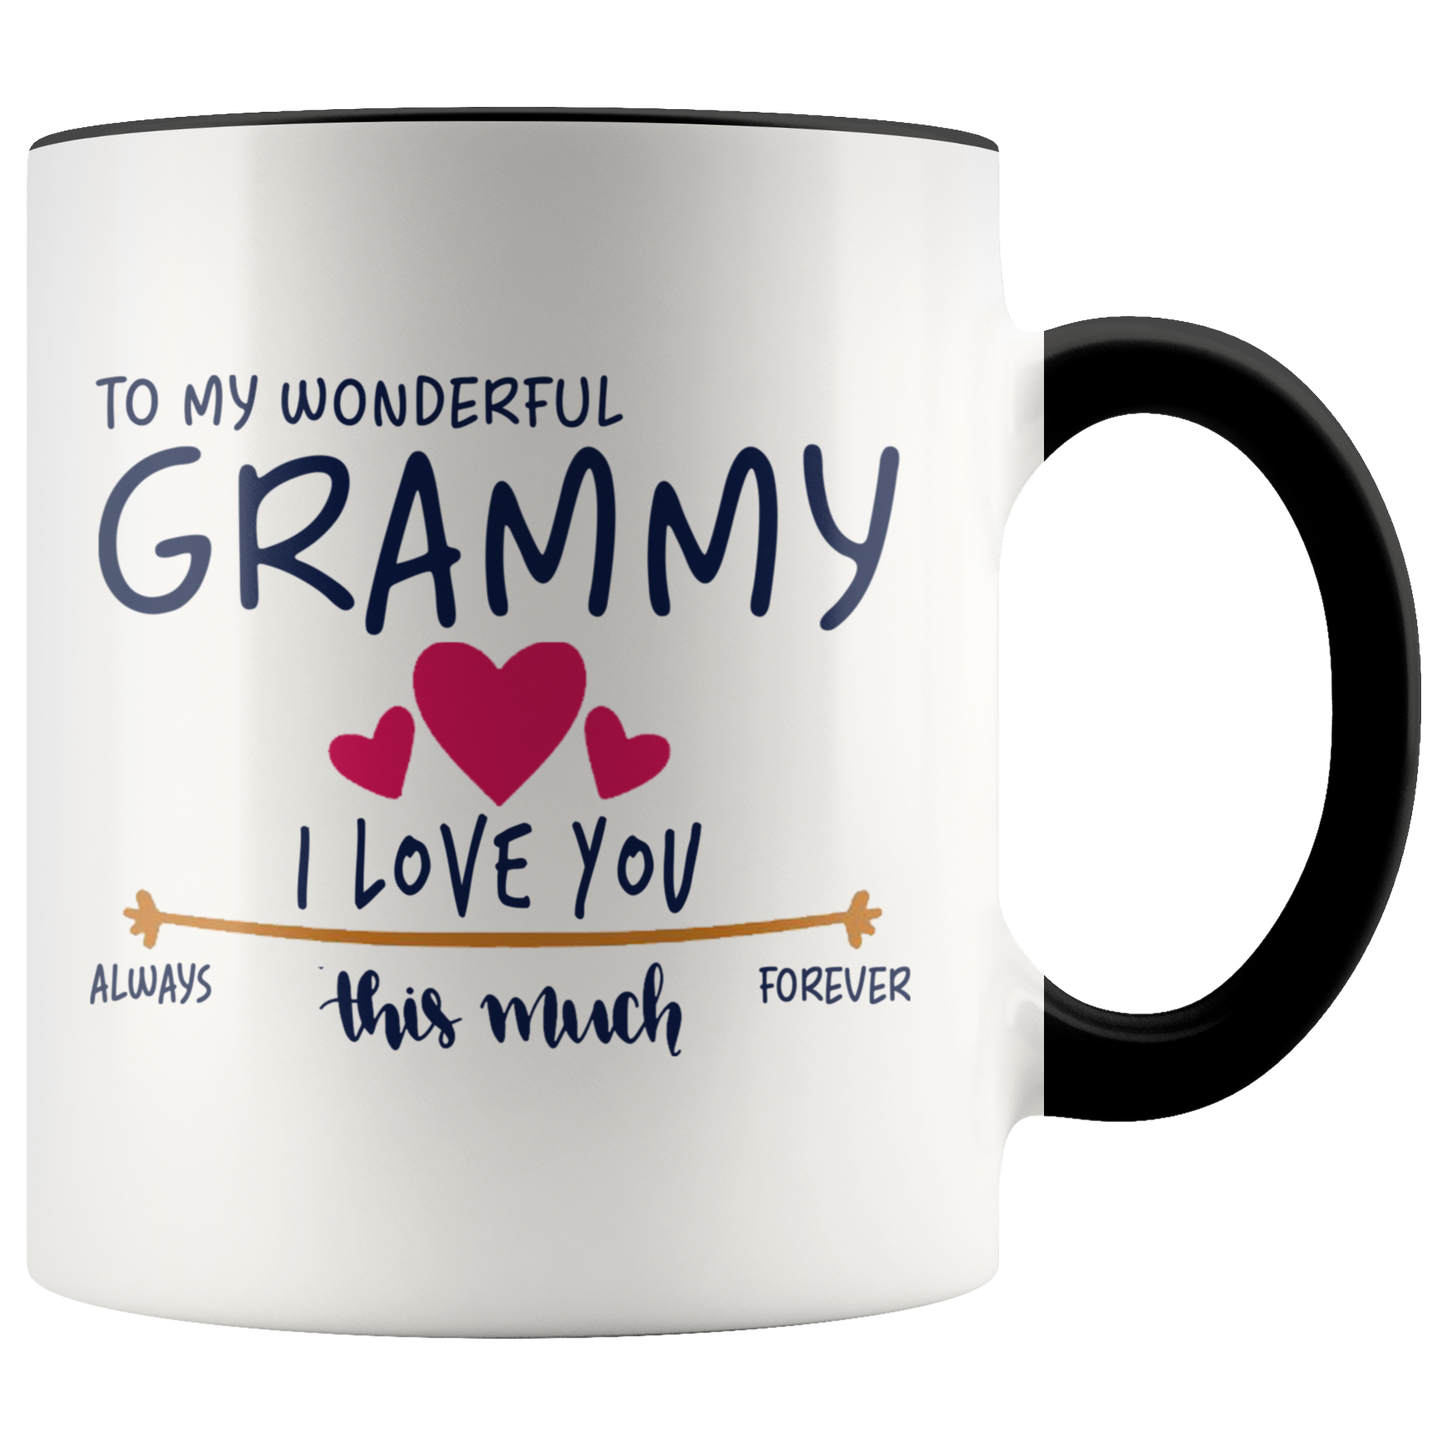 M-21397823-sp-26910 - [ Grammy | 1 | 1 ] (CC_Accent_Mug_) Mother Day Gifts - To My Wonderful Grammy I Love You This Mu